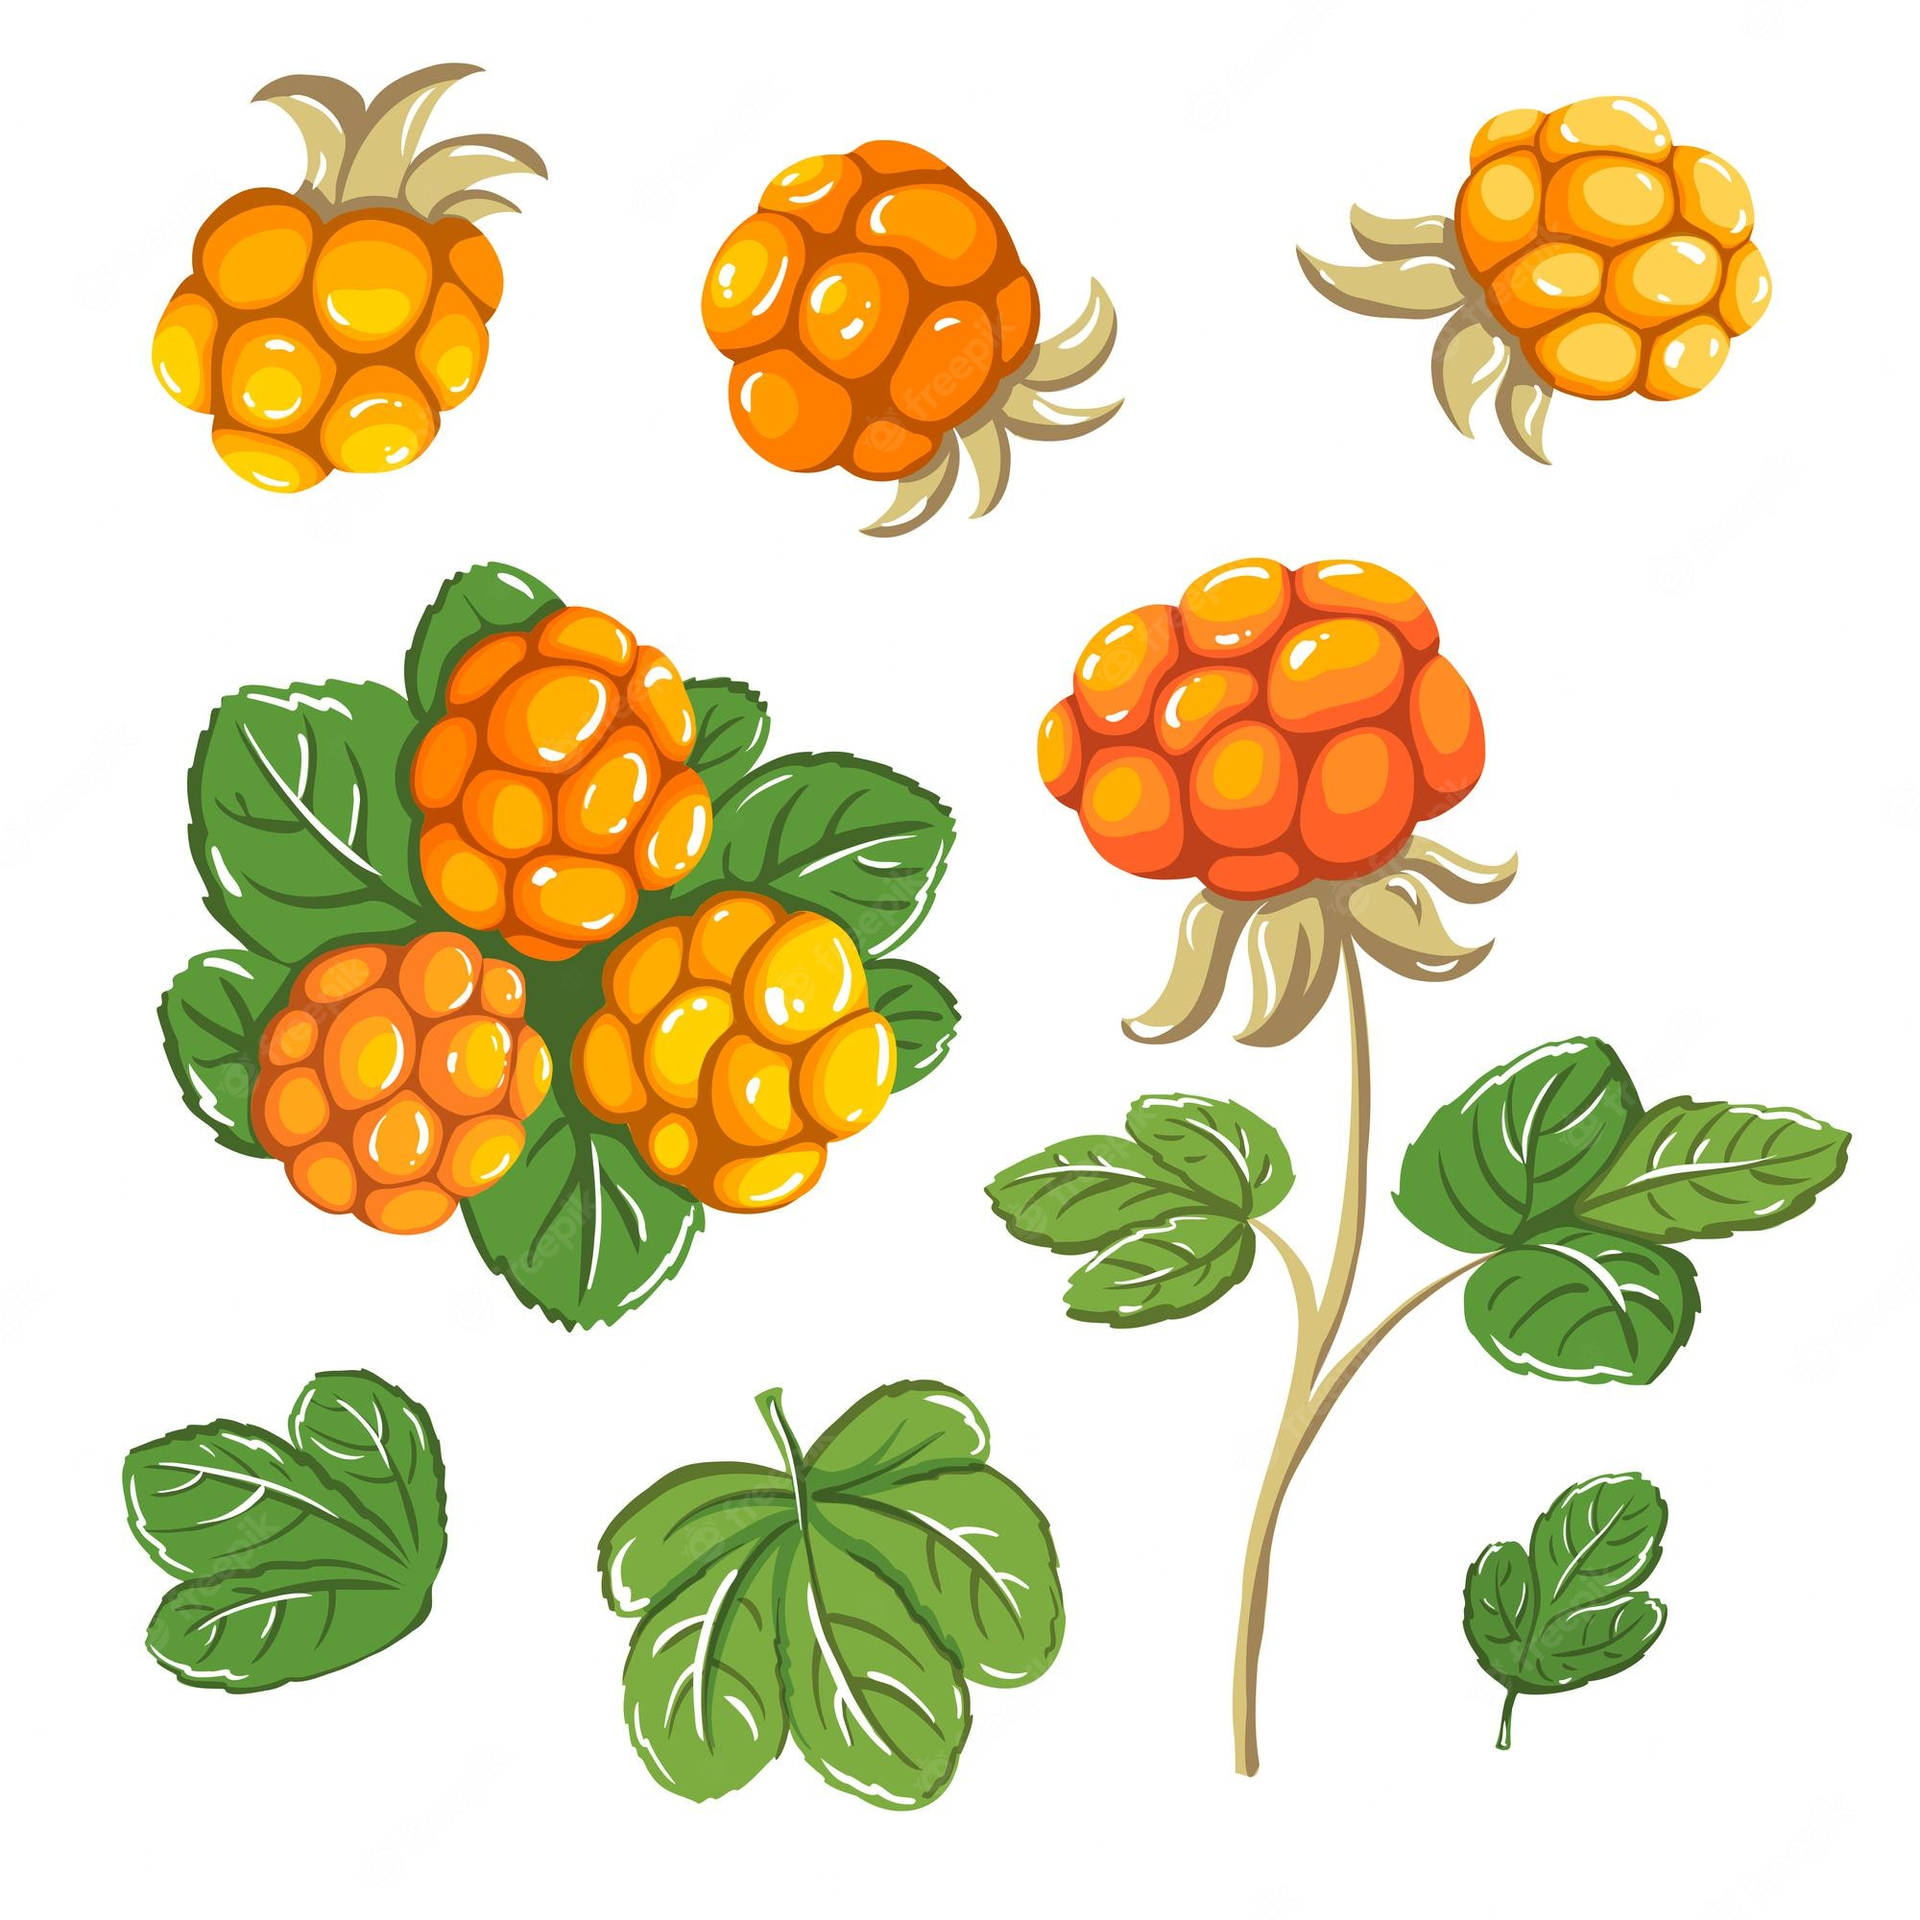 Cloudberries And Leaves Drawing Wallpaper